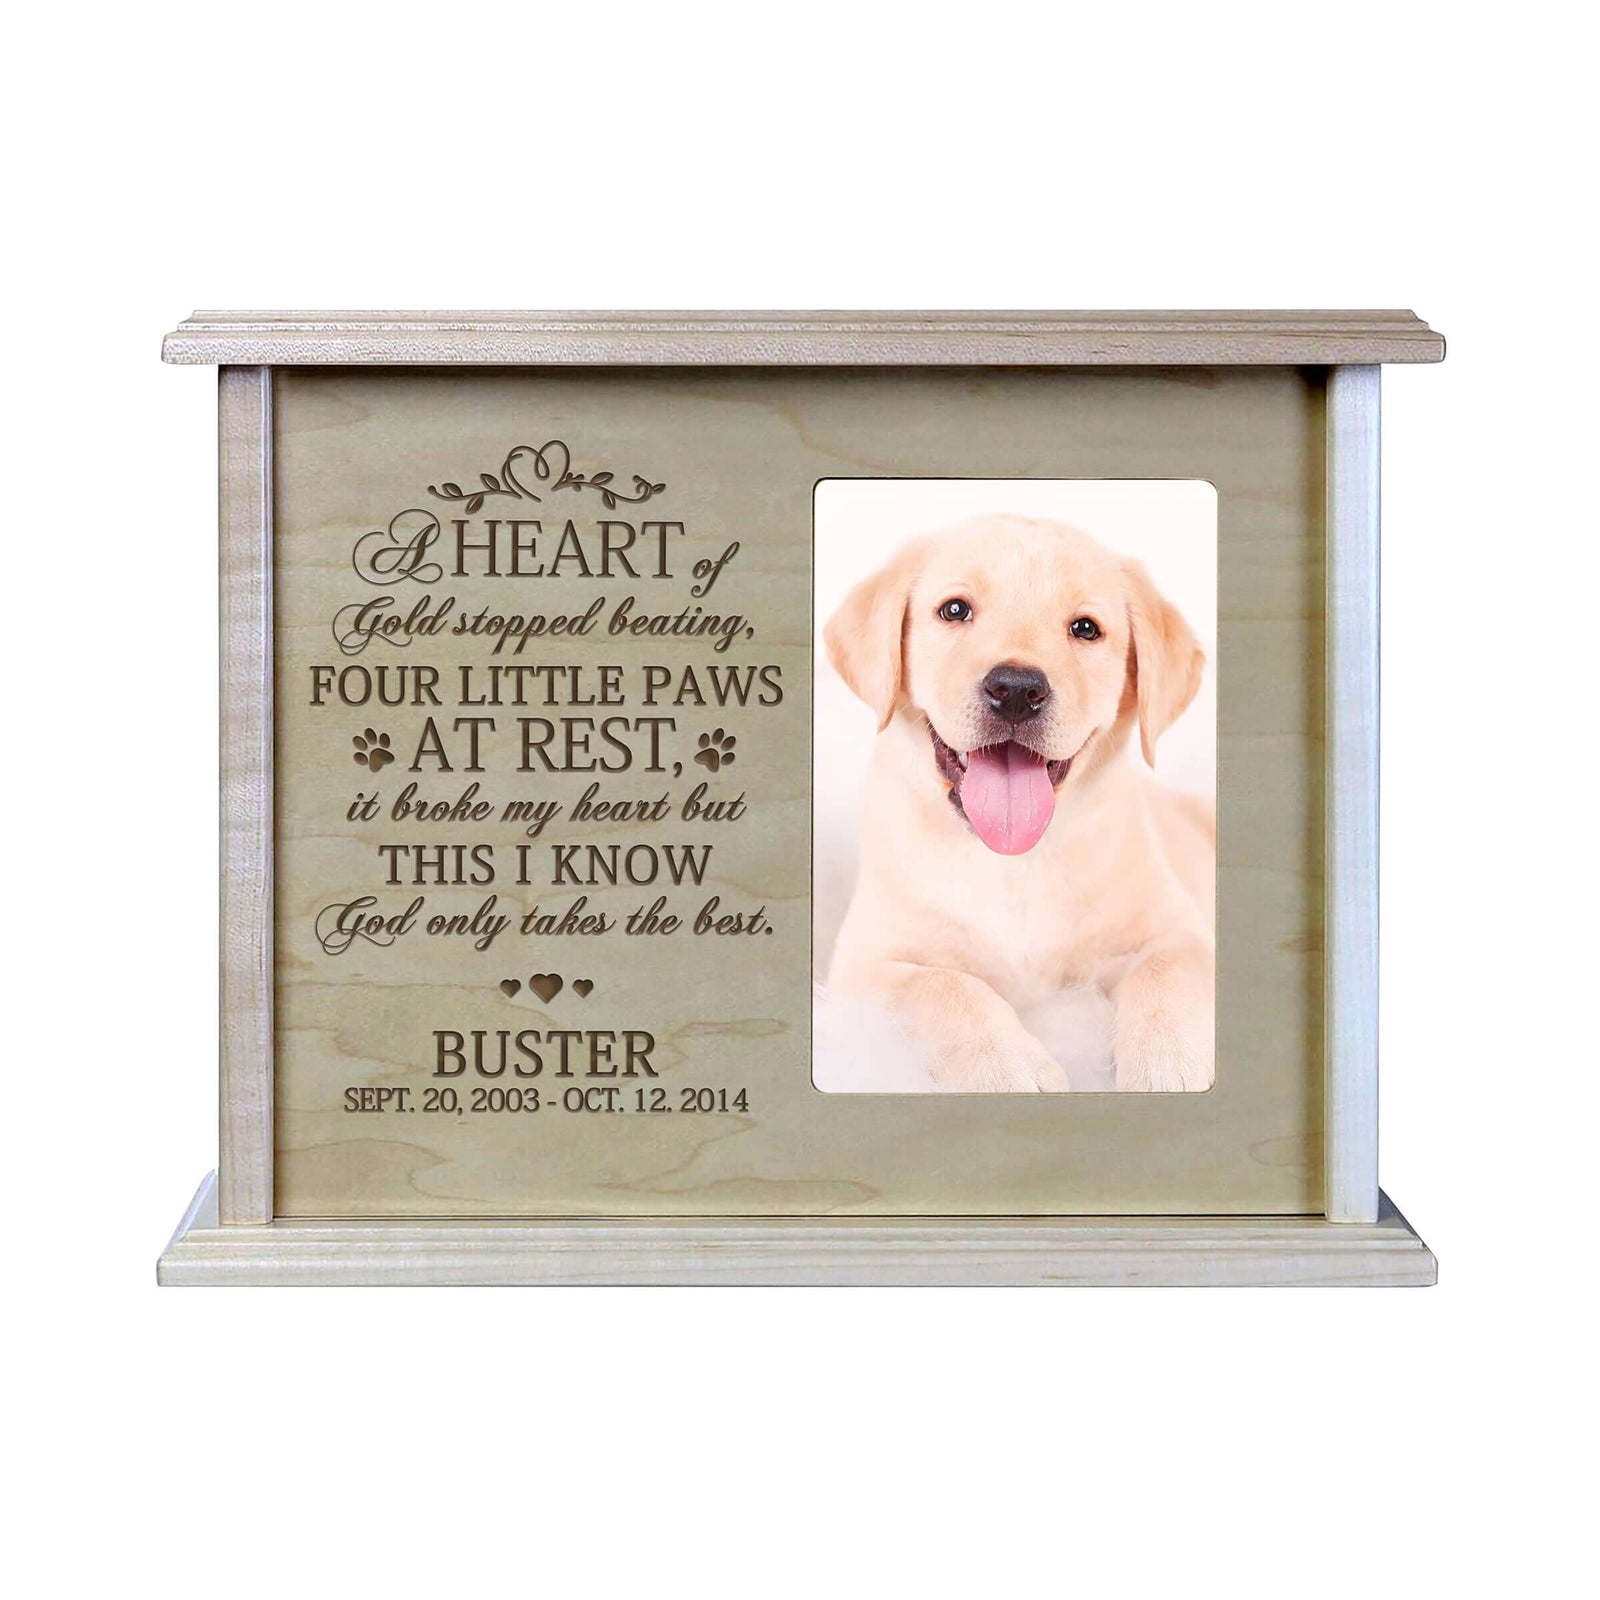 Pet Memorial Picture Cremation Urn Box for Dog or Cat - A Heart of Gold